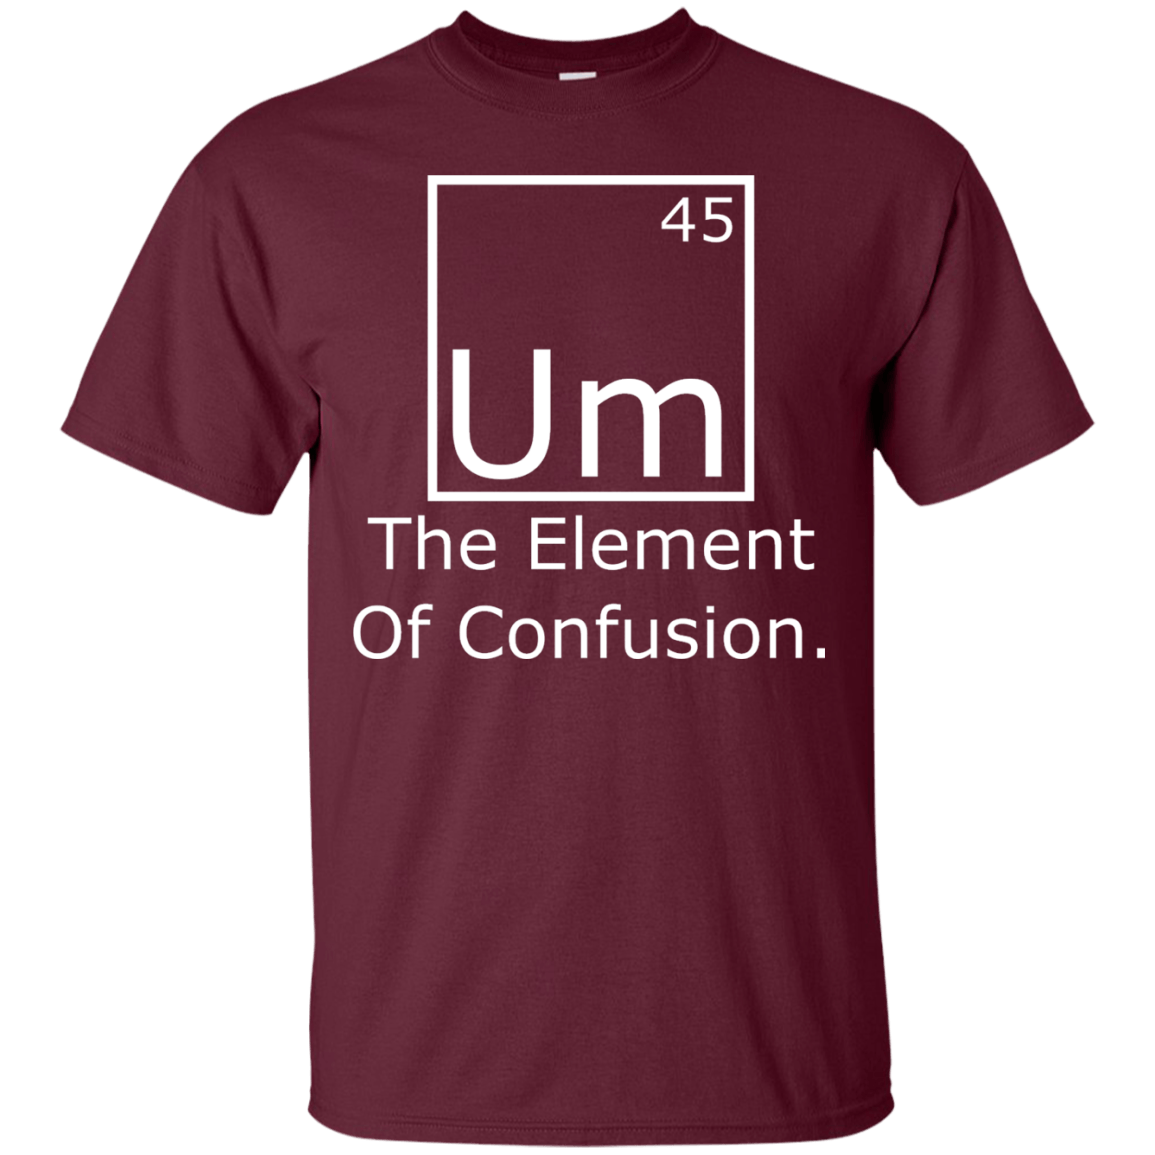 Um - The Element Of Confusion - Engineering Outfitters